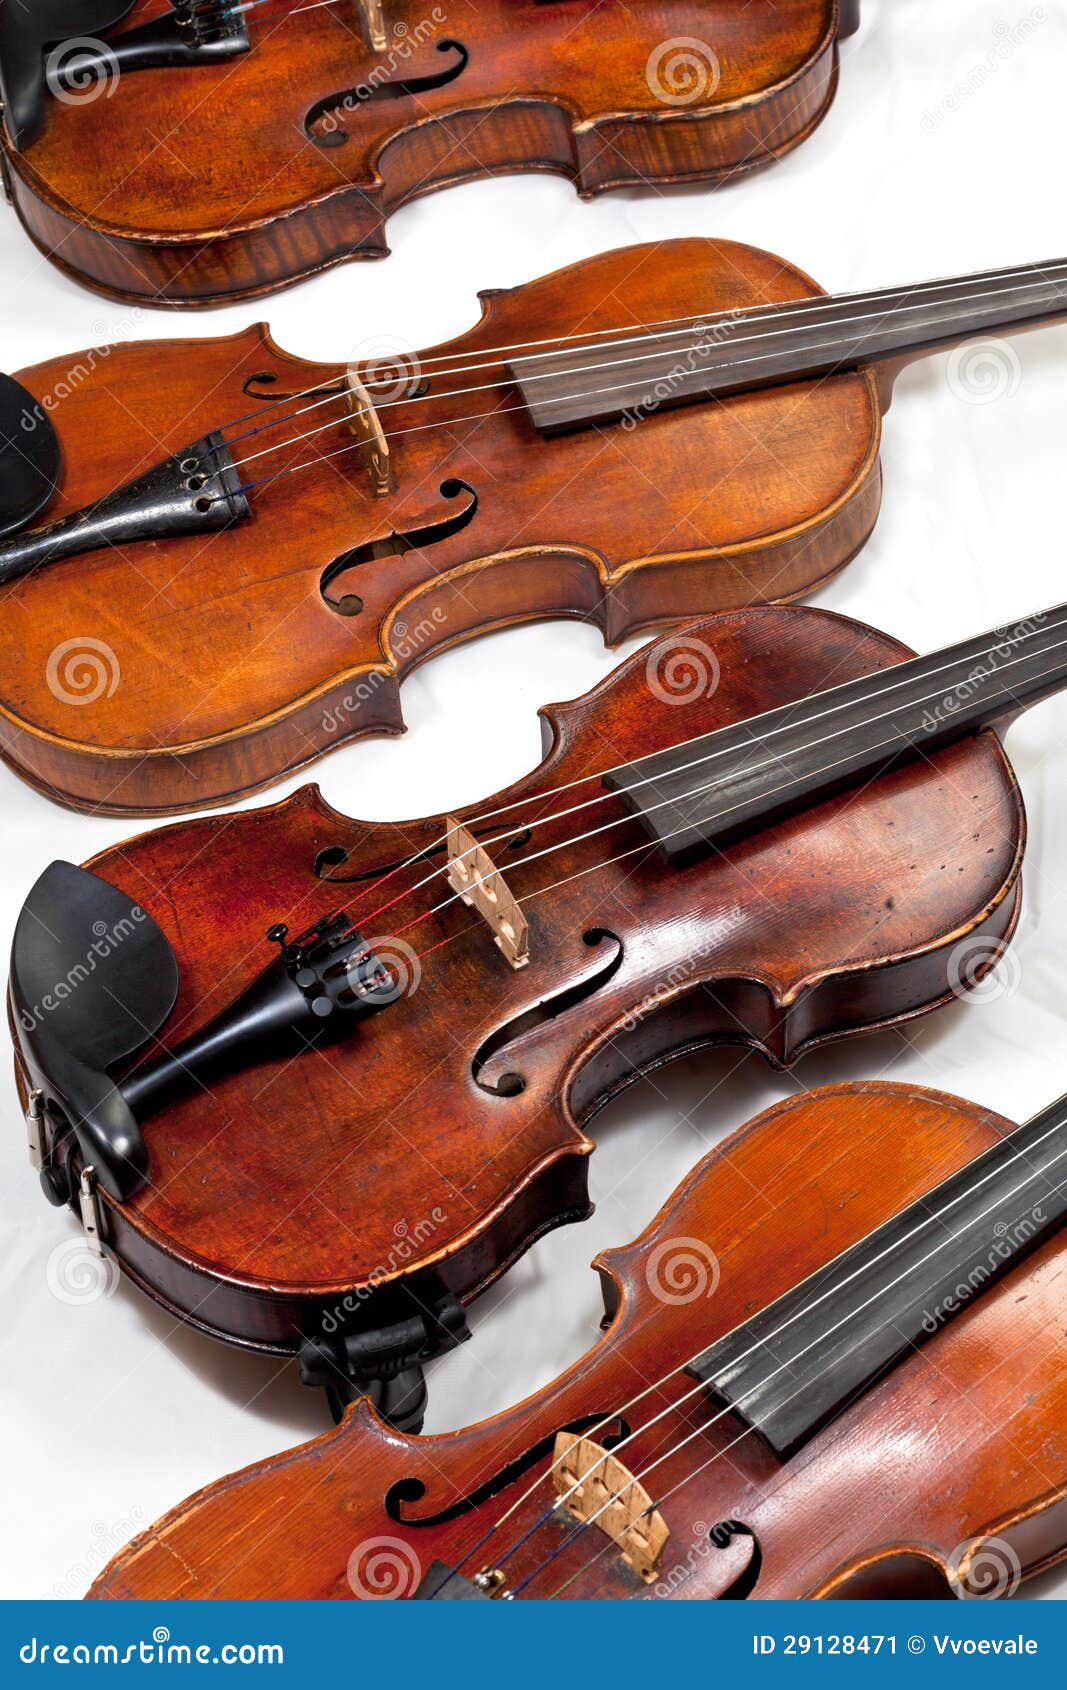 several used fiddles